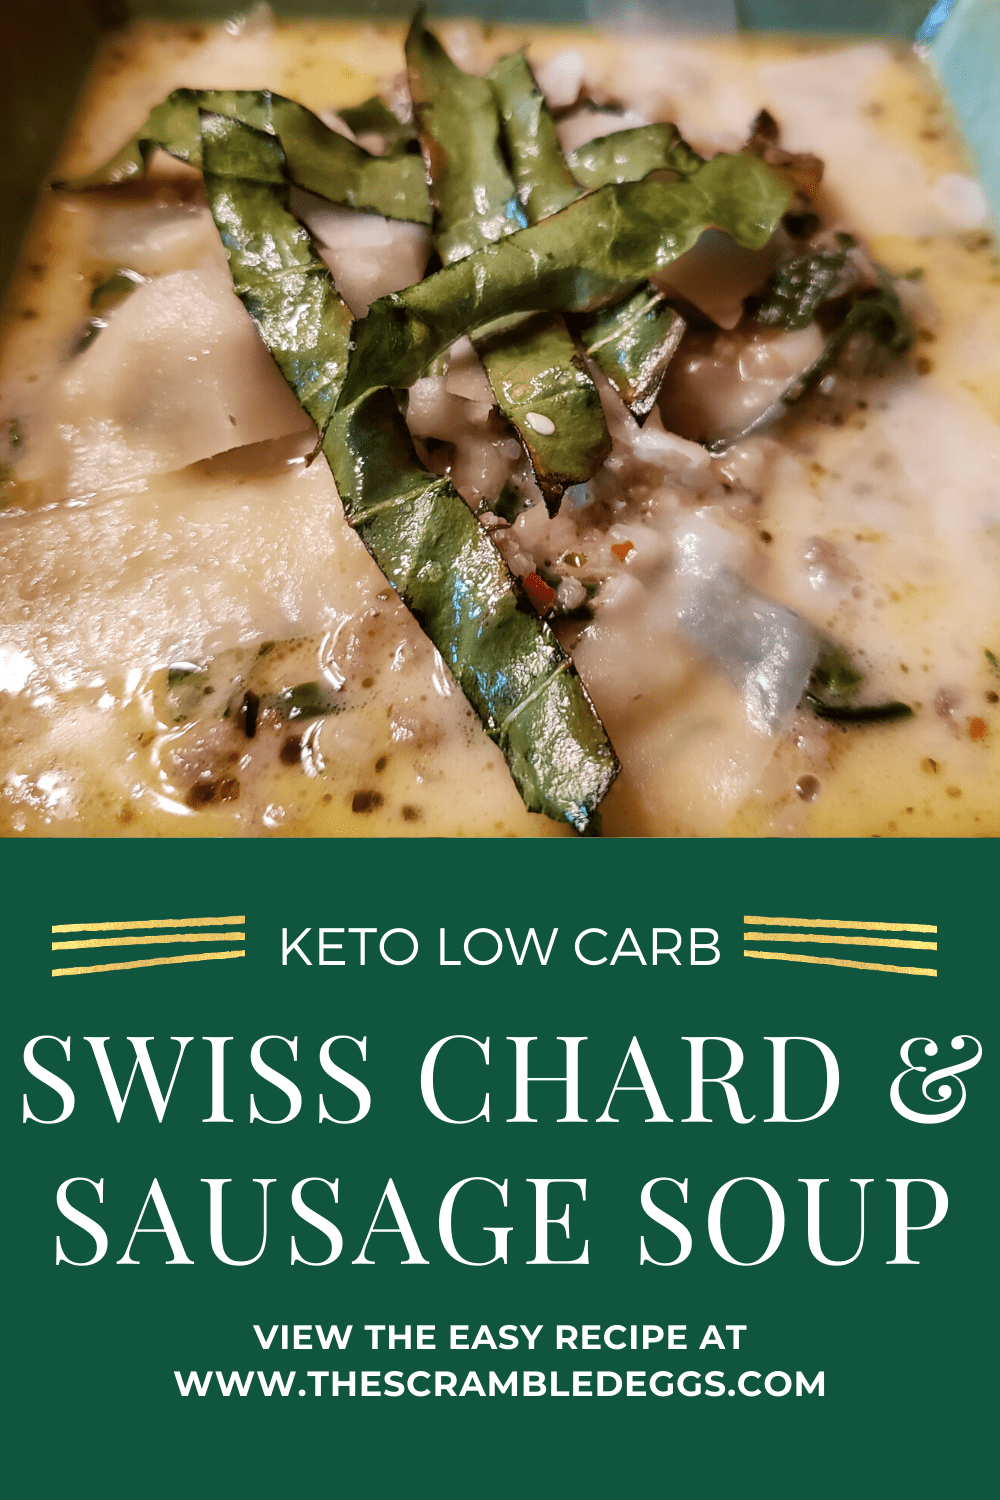 Swiss Chard & Sausage Soup - Low Carb - The Scrambled Eggs